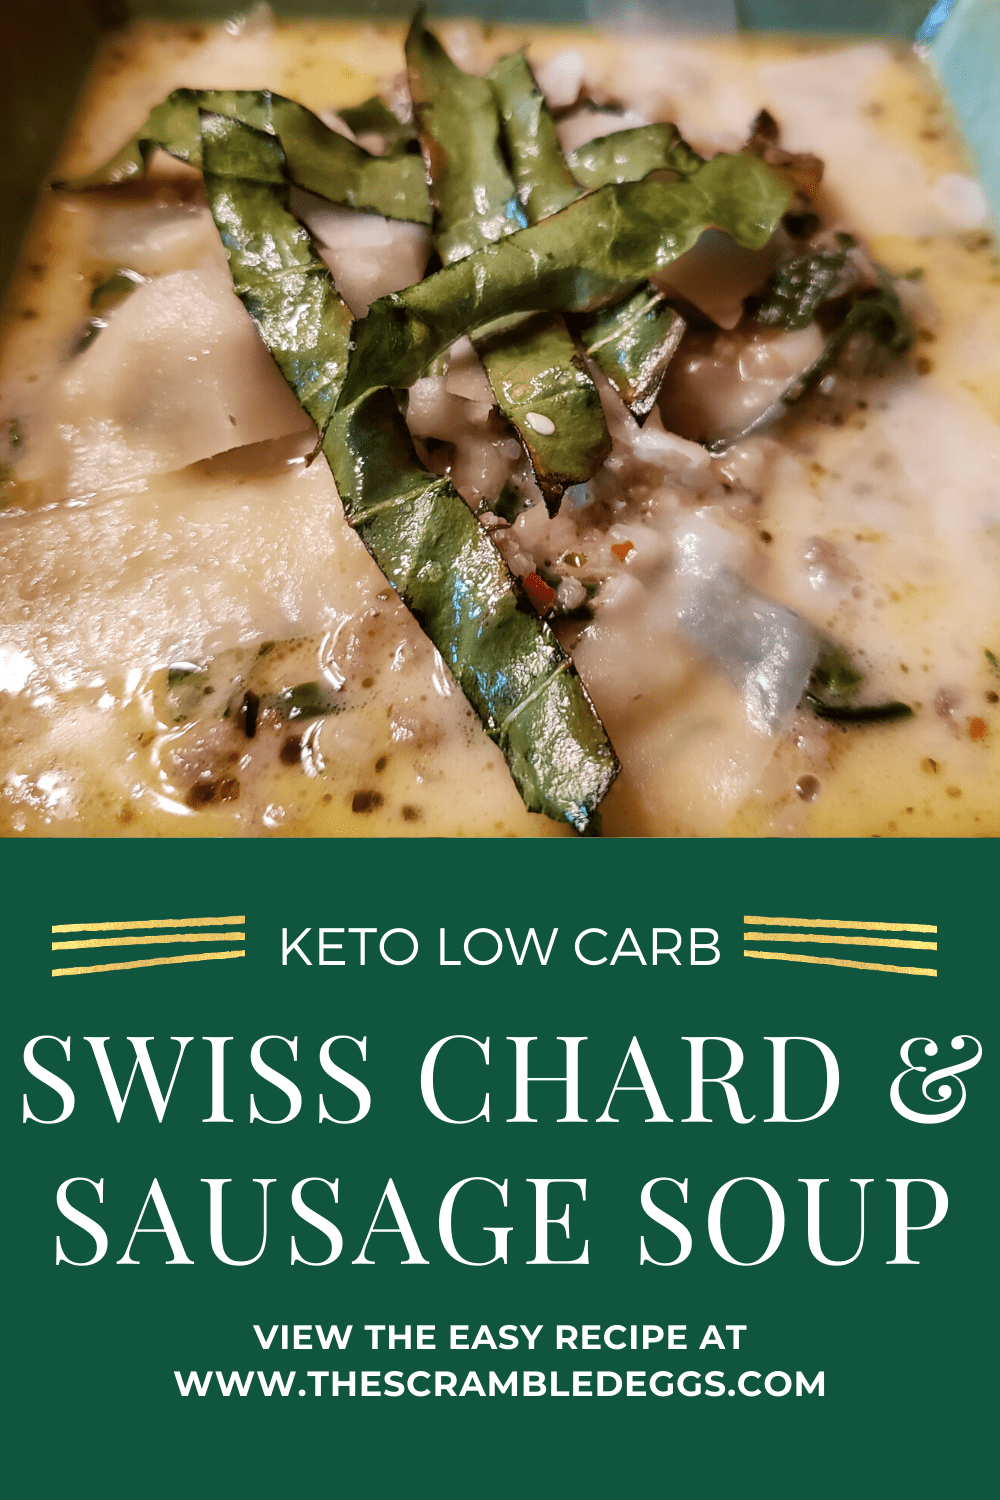 Swiss Chard & Sausage Soup - Low Carb - The Scrambled Eggs